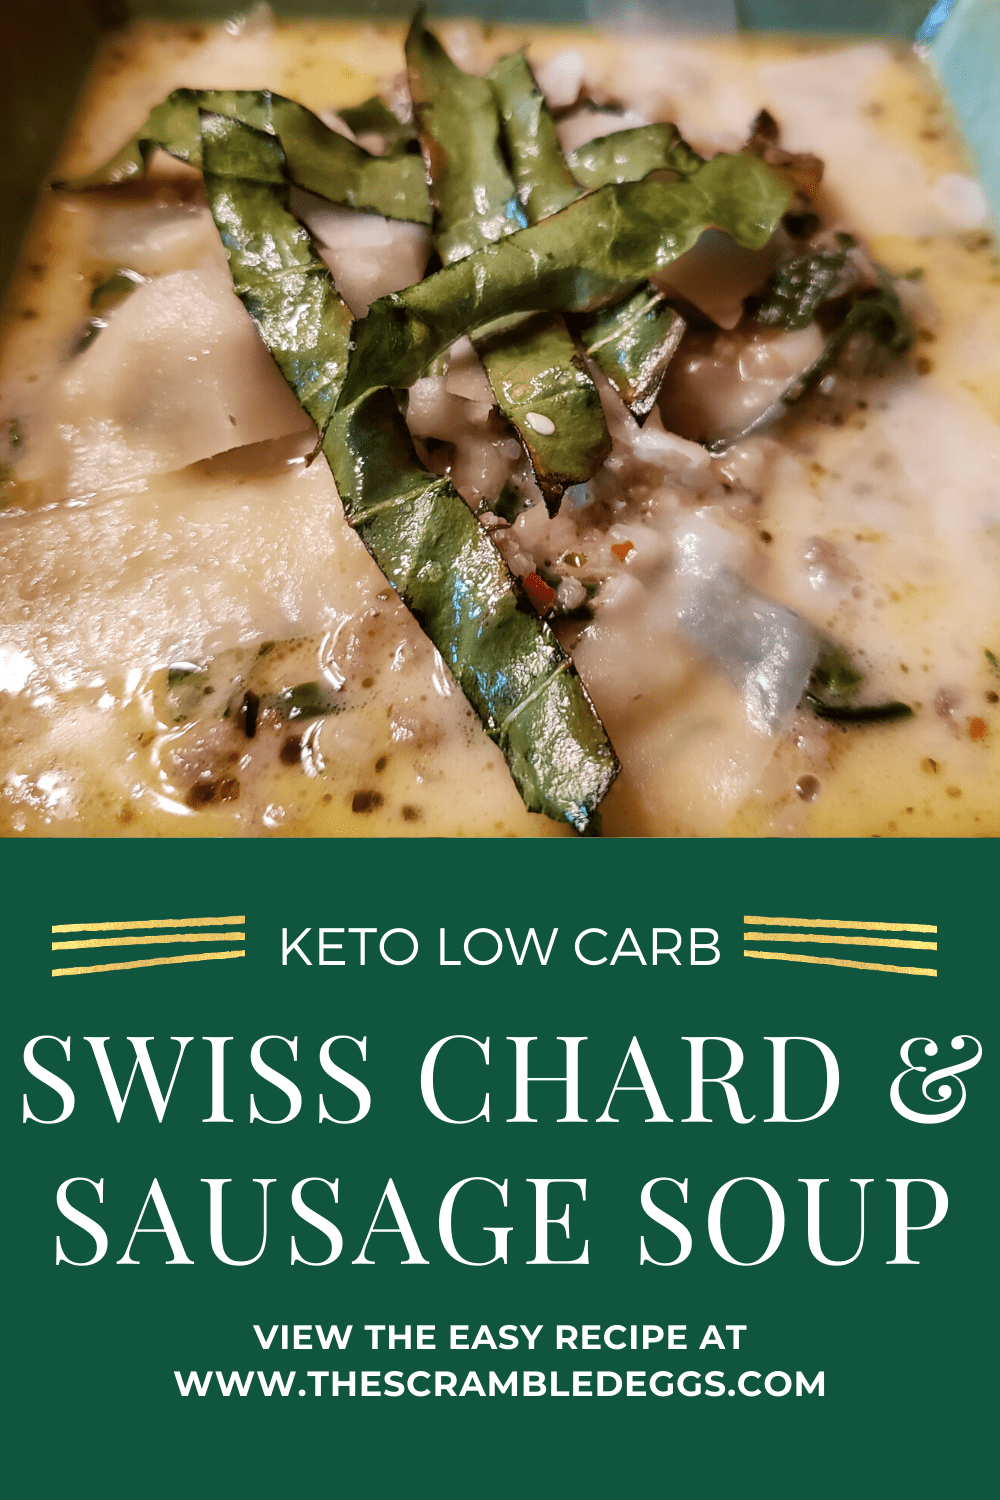 Swiss Chard & Sausage Soup - Low Carb - The Scrambled Eggs